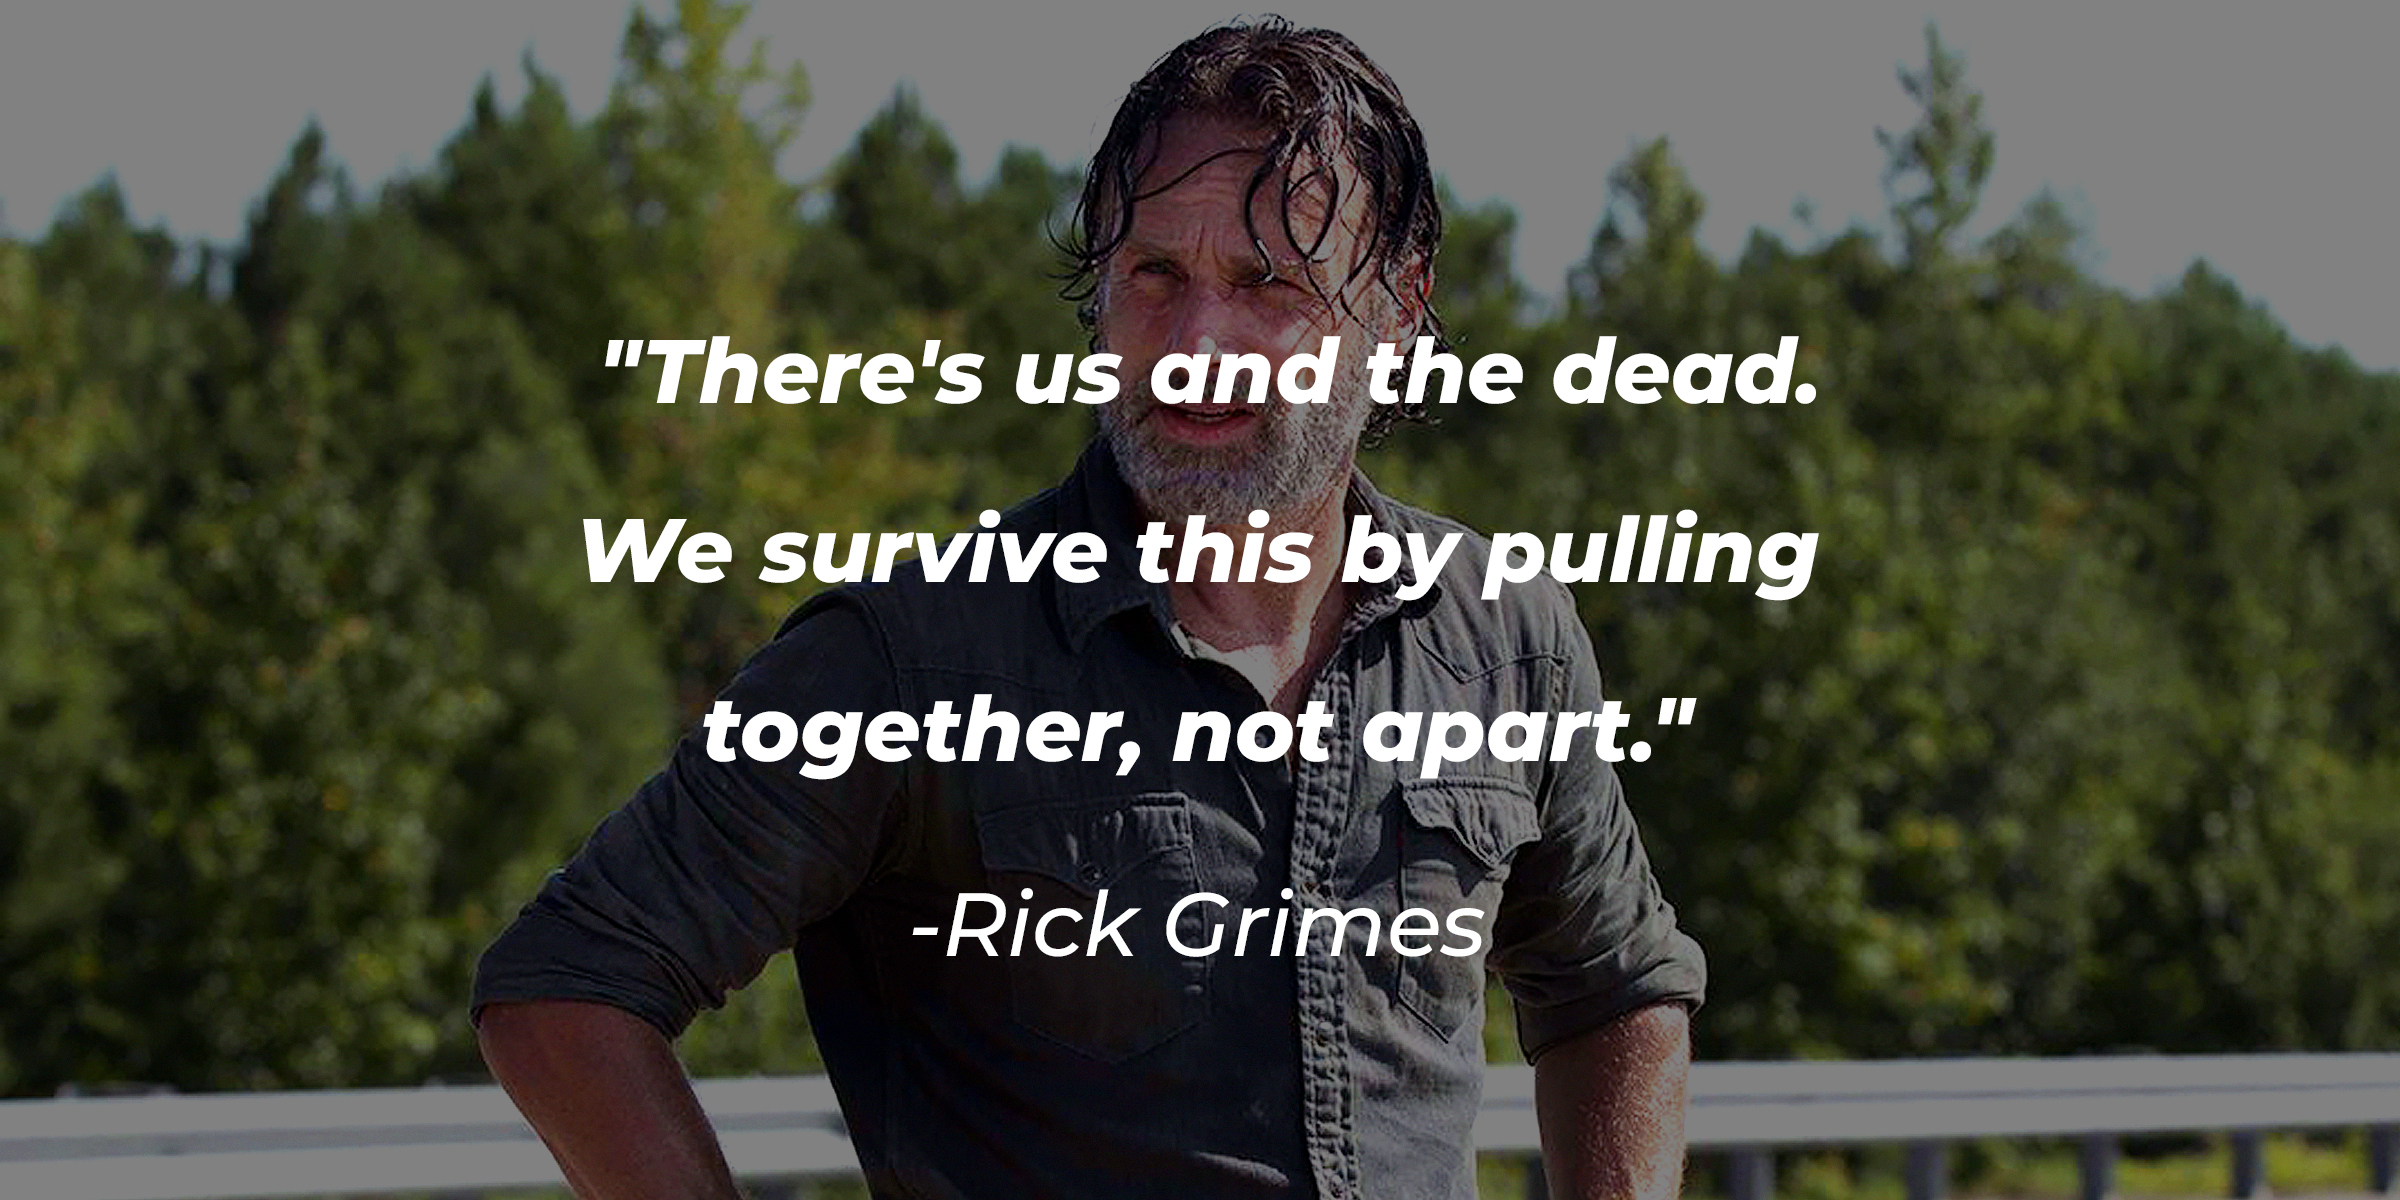 An image of Rick Grimes with his quote: "There's us and the dead. We survive this by pulling together, not apart." | Source: Facebook.com/TheWalkingDeadAMC